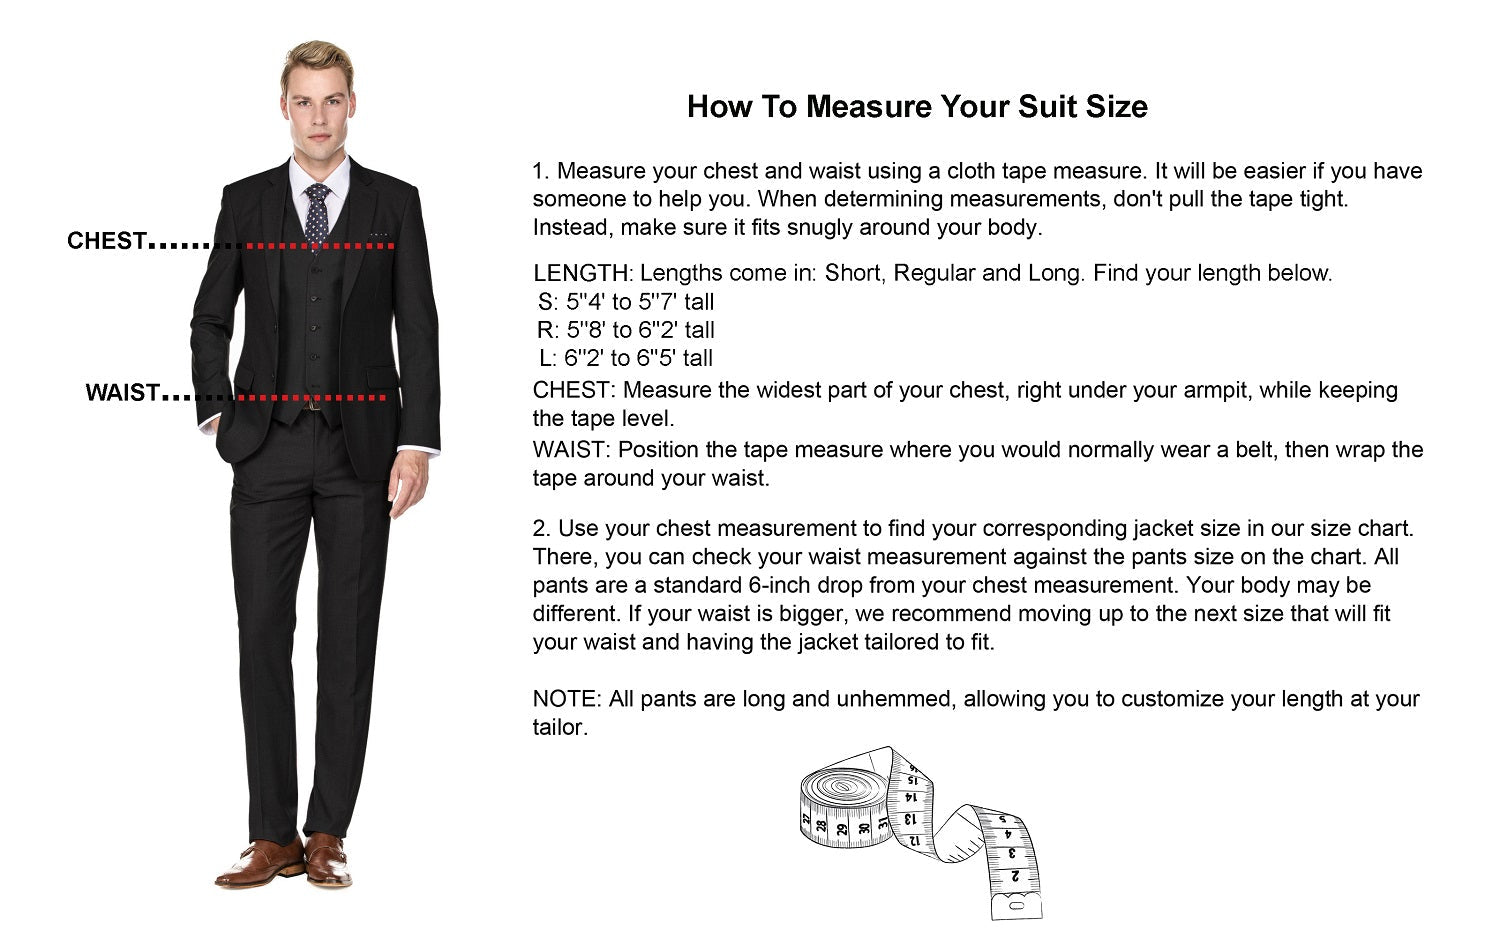 Men's Slim-Fit 2PC Check Double Breasted Plaid Suit Daily Haute